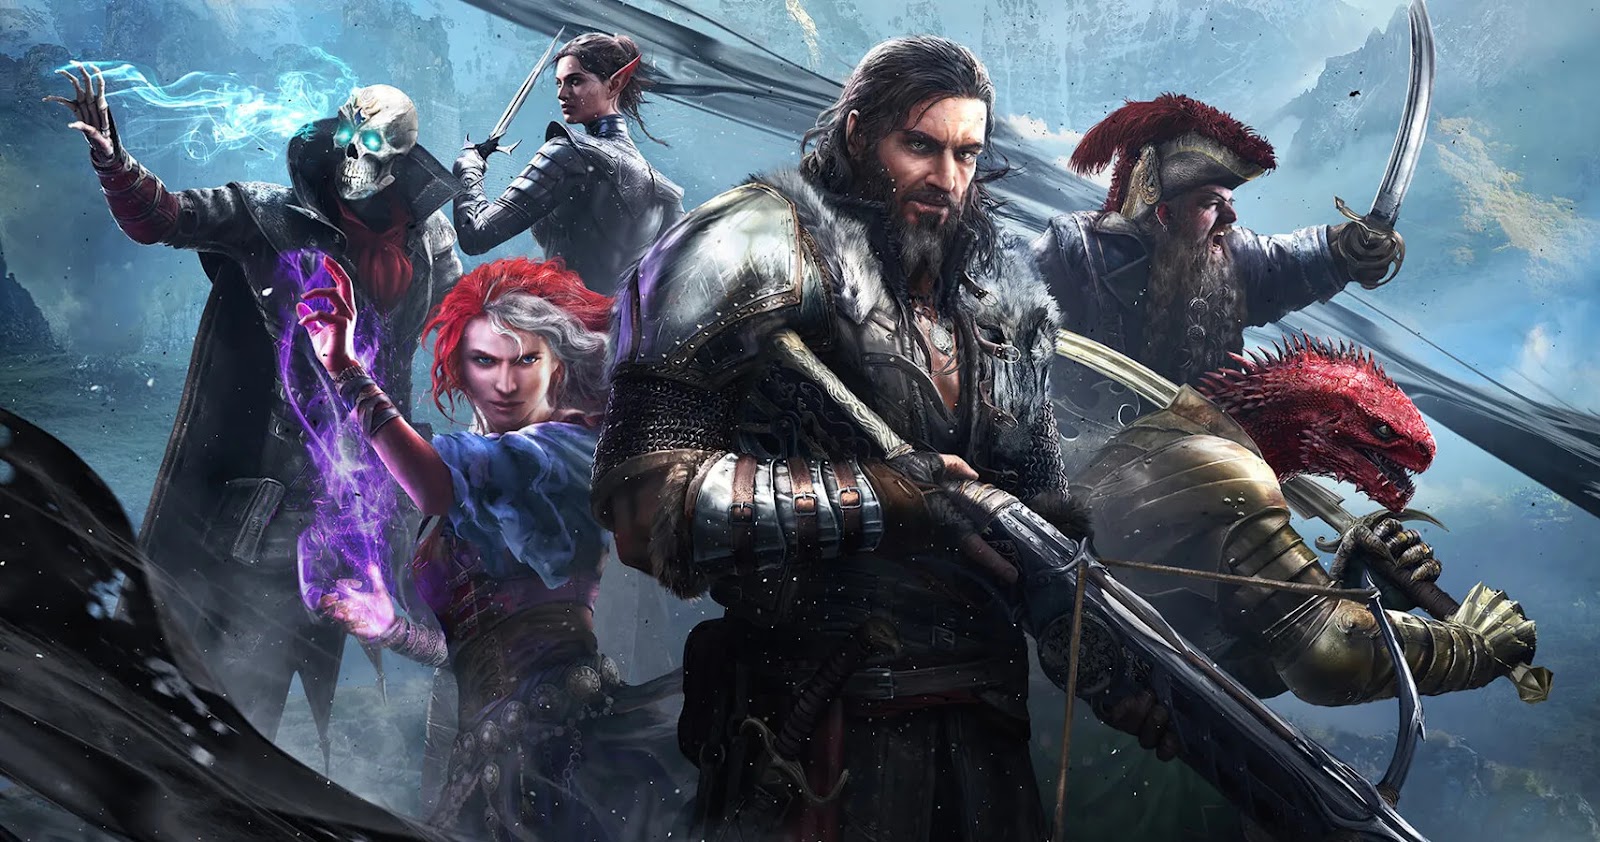 Promotional artwork of the main characters from Divinity: Original Sin 2. 